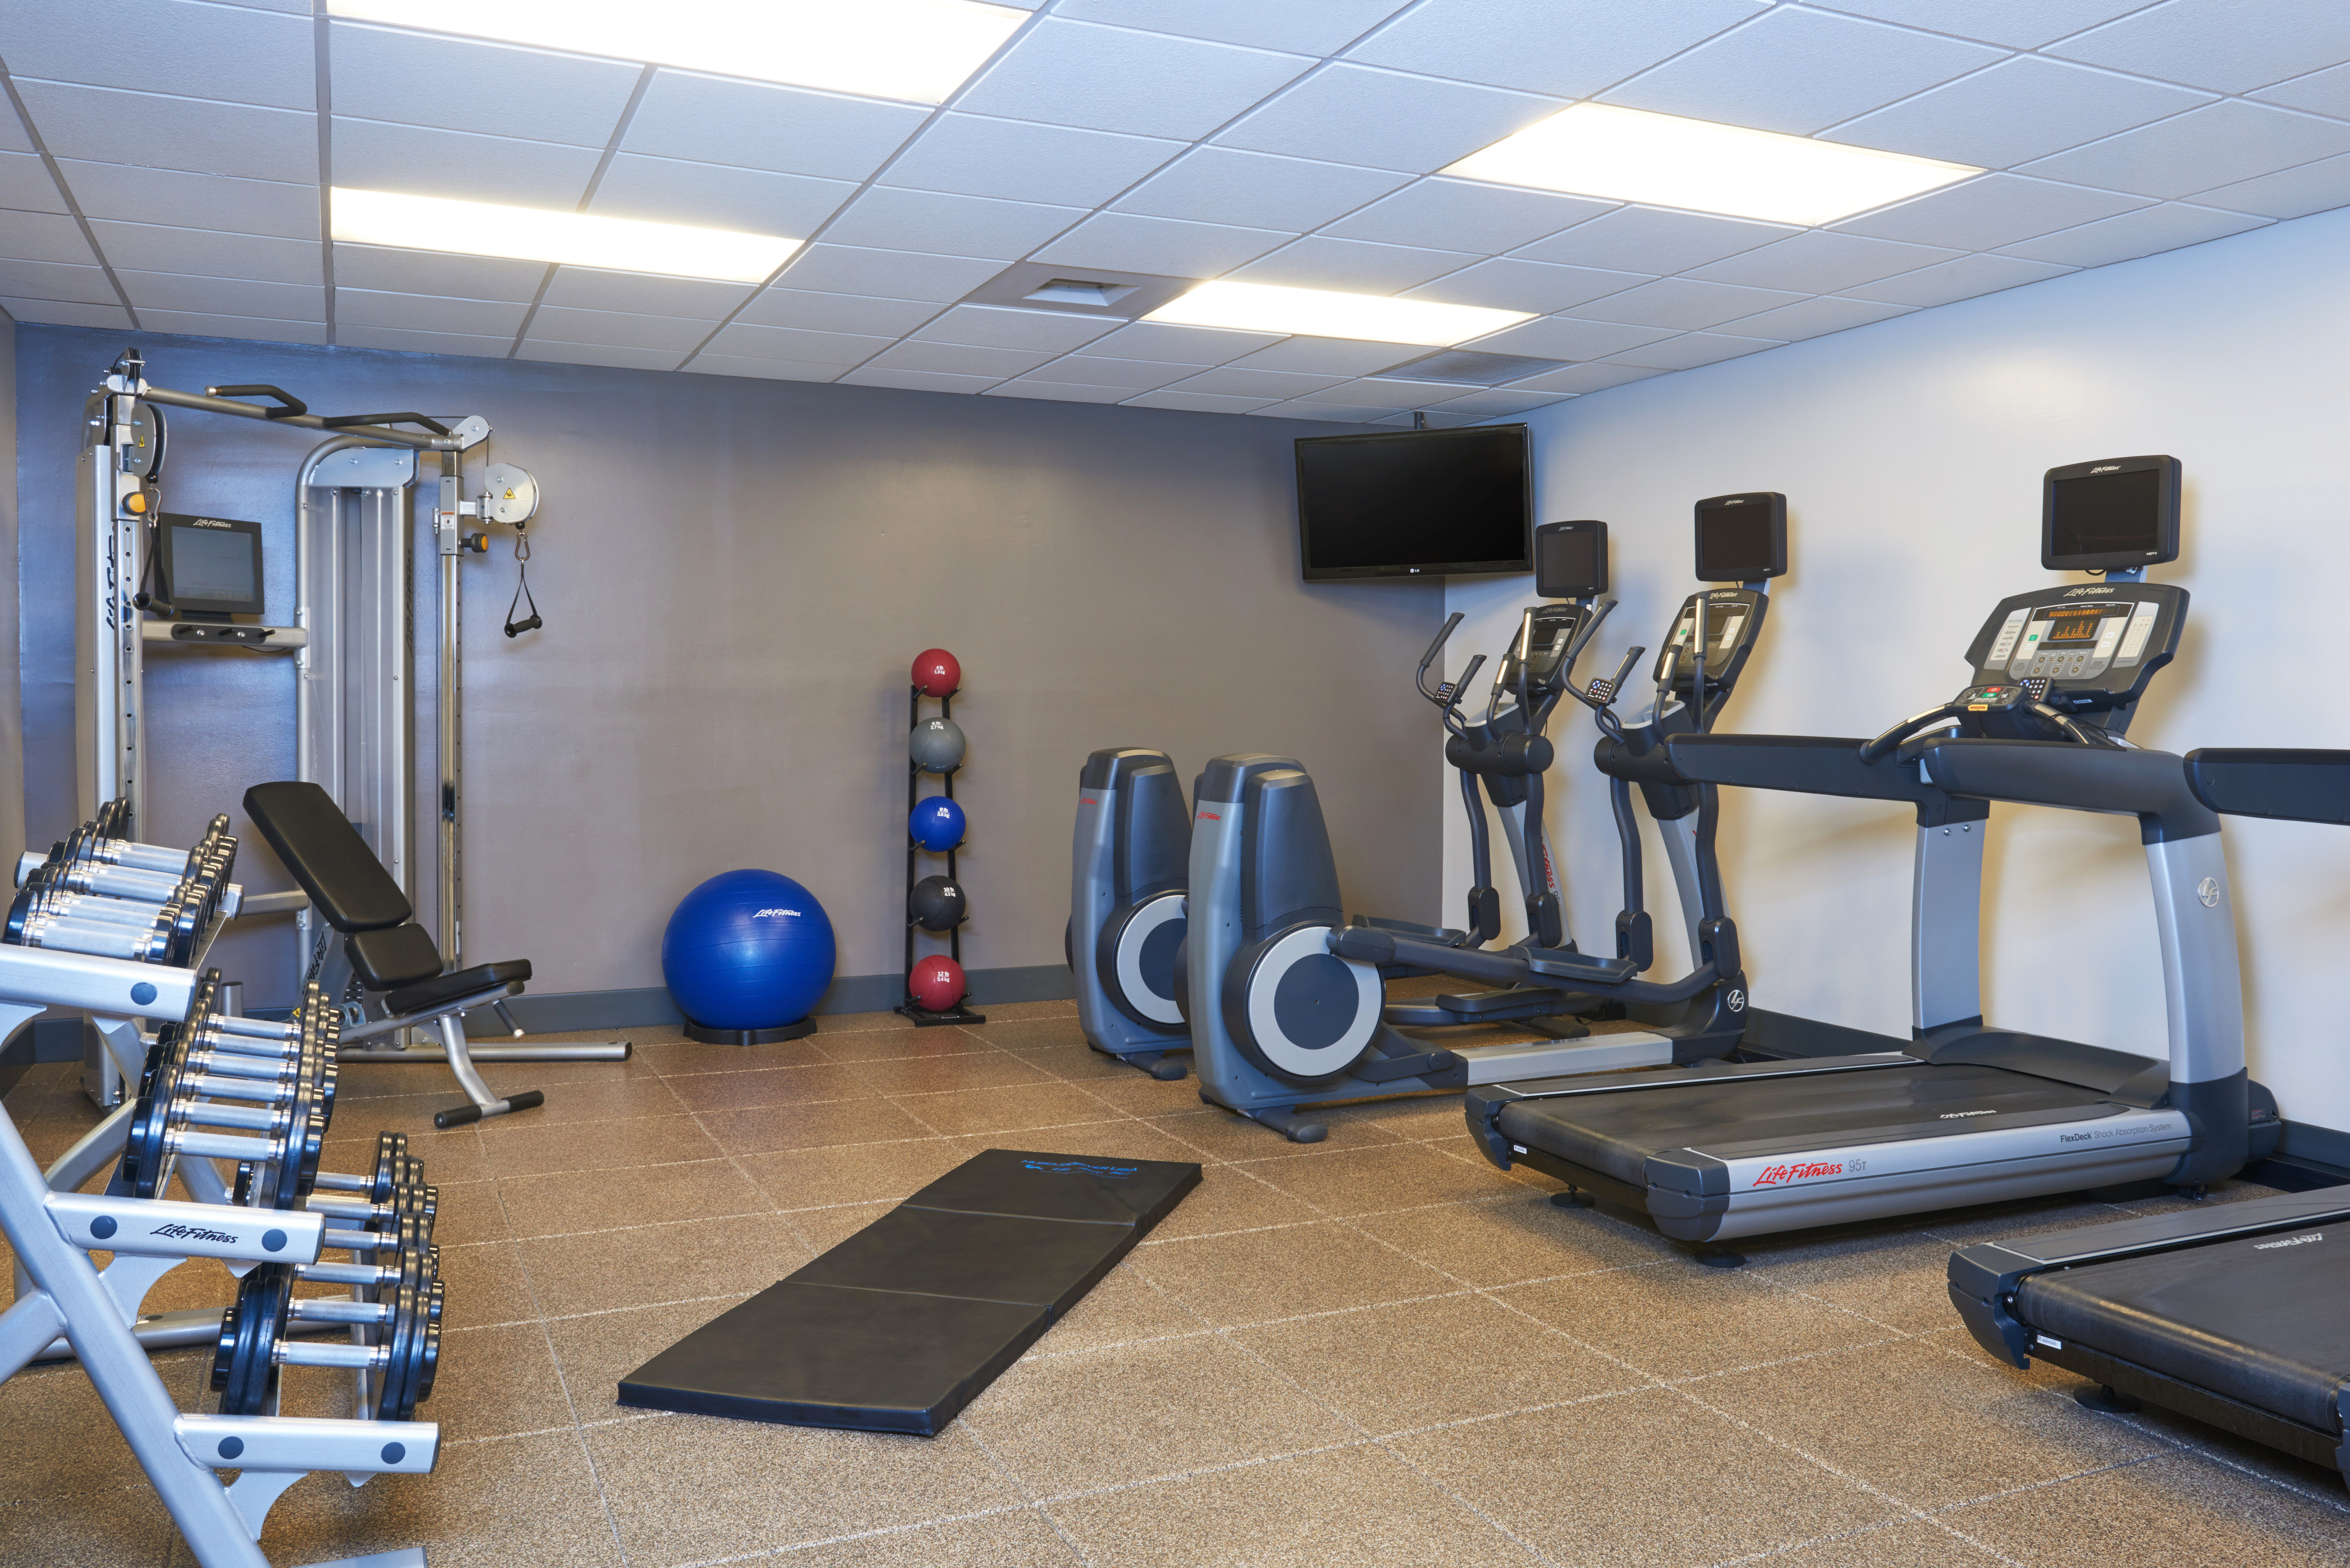 Fitness Center With Free Weights, Weight Machine, Weight Balls, Exercise Ball, TV, Cardio Equipment, and Floor Mat